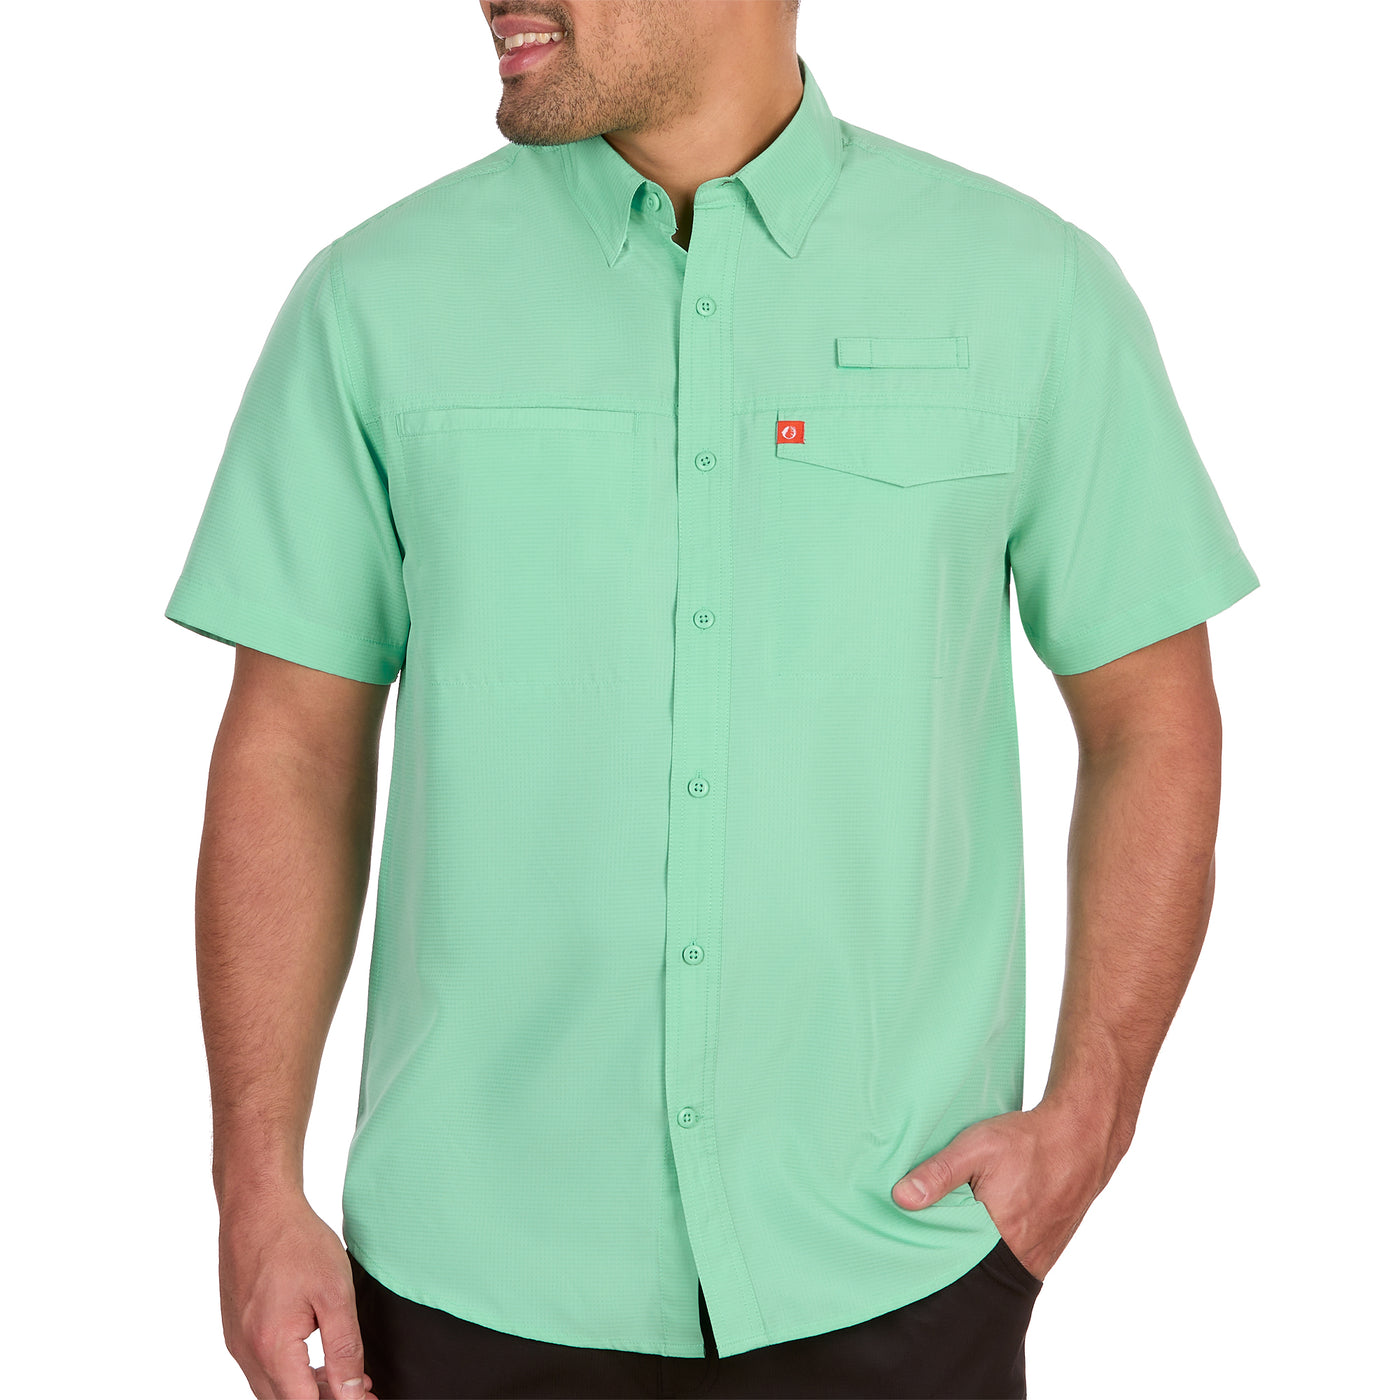 The American Outdoorsman Poly Grid Fishing Short Sleeve Shirt for Men - UP40 Protection, Quick-Dry, Ultra Lightweight (Duck Green, XL), Men's